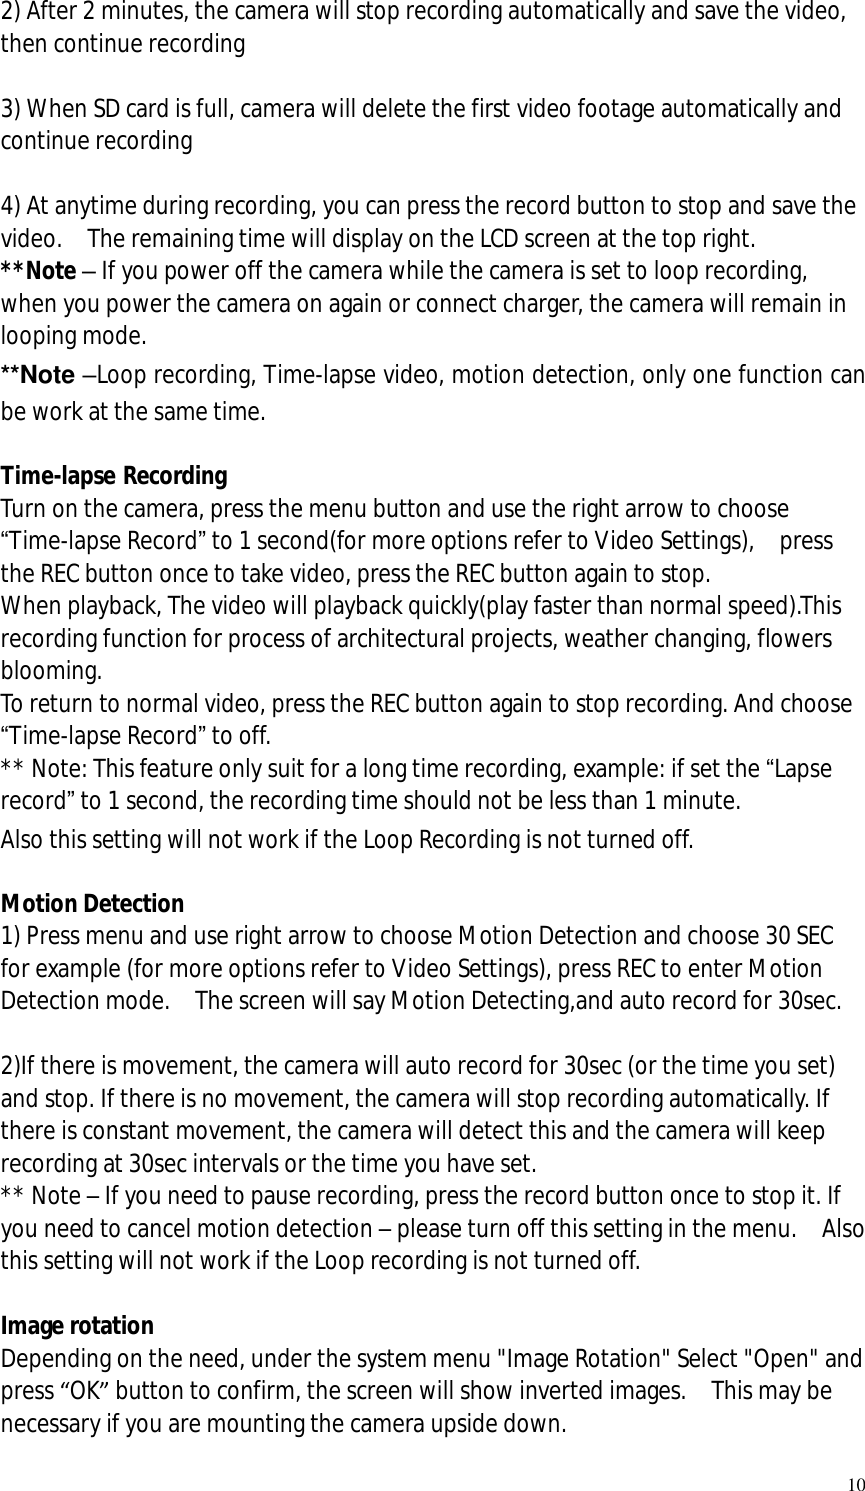   10 2) After 2 minutes, the camera will stop recording automatically and save the video, then continue recording  3) When SD card is full, camera will delete the first video footage automatically and continue recording  4) At anytime during recording, you can press the record button to stop and save the video.  The remaining time will display on the LCD screen at the top right. **Note – If you power off the camera while the camera is set to loop recording, when you power the camera on again or connect charger, the camera will remain in looping mode.  **Note –Loop recording, Time-lapse video, motion detection, only one function can be work at the same time.  Time-lapse Recording Turn on the camera, press the menu button and use the right arrow to choose “Time-lapse Record” to 1 second(for more options refer to Video Settings),  press the REC button once to take video, press the REC button again to stop.  When playback, The video will playback quickly(play faster than normal speed).This recording function for process of architectural projects, weather changing, flowers blooming. To return to normal video, press the REC button again to stop recording. And choose “Time-lapse Record” to off. ** Note: This feature only suit for a long time recording, example: if set the “Lapse record” to 1 second, the recording time should not be less than 1 minute. Also this setting will not work if the Loop Recording is not turned off.  Motion Detection 1) Press menu and use right arrow to choose Motion Detection and choose 30 SEC for example (for more options refer to Video Settings), press REC to enter Motion Detection mode.  The screen will say Motion Detecting,and auto record for 30sec.  2)If there is movement, the camera will auto record for 30sec (or the time you set) and stop. If there is no movement, the camera will stop recording automatically. If there is constant movement, the camera will detect this and the camera will keep recording at 30sec intervals or the time you have set. ** Note – If you need to pause recording, press the record button once to stop it. If you need to cancel motion detection – please turn off this setting in the menu.  Also this setting will not work if the Loop recording is not turned off.  Image rotation Depending on the need, under the system menu &quot;Image Rotation&quot; Select &quot;Open&quot; and press “OK” button to confirm, the screen will show inverted images.  This may be necessary if you are mounting the camera upside down. 